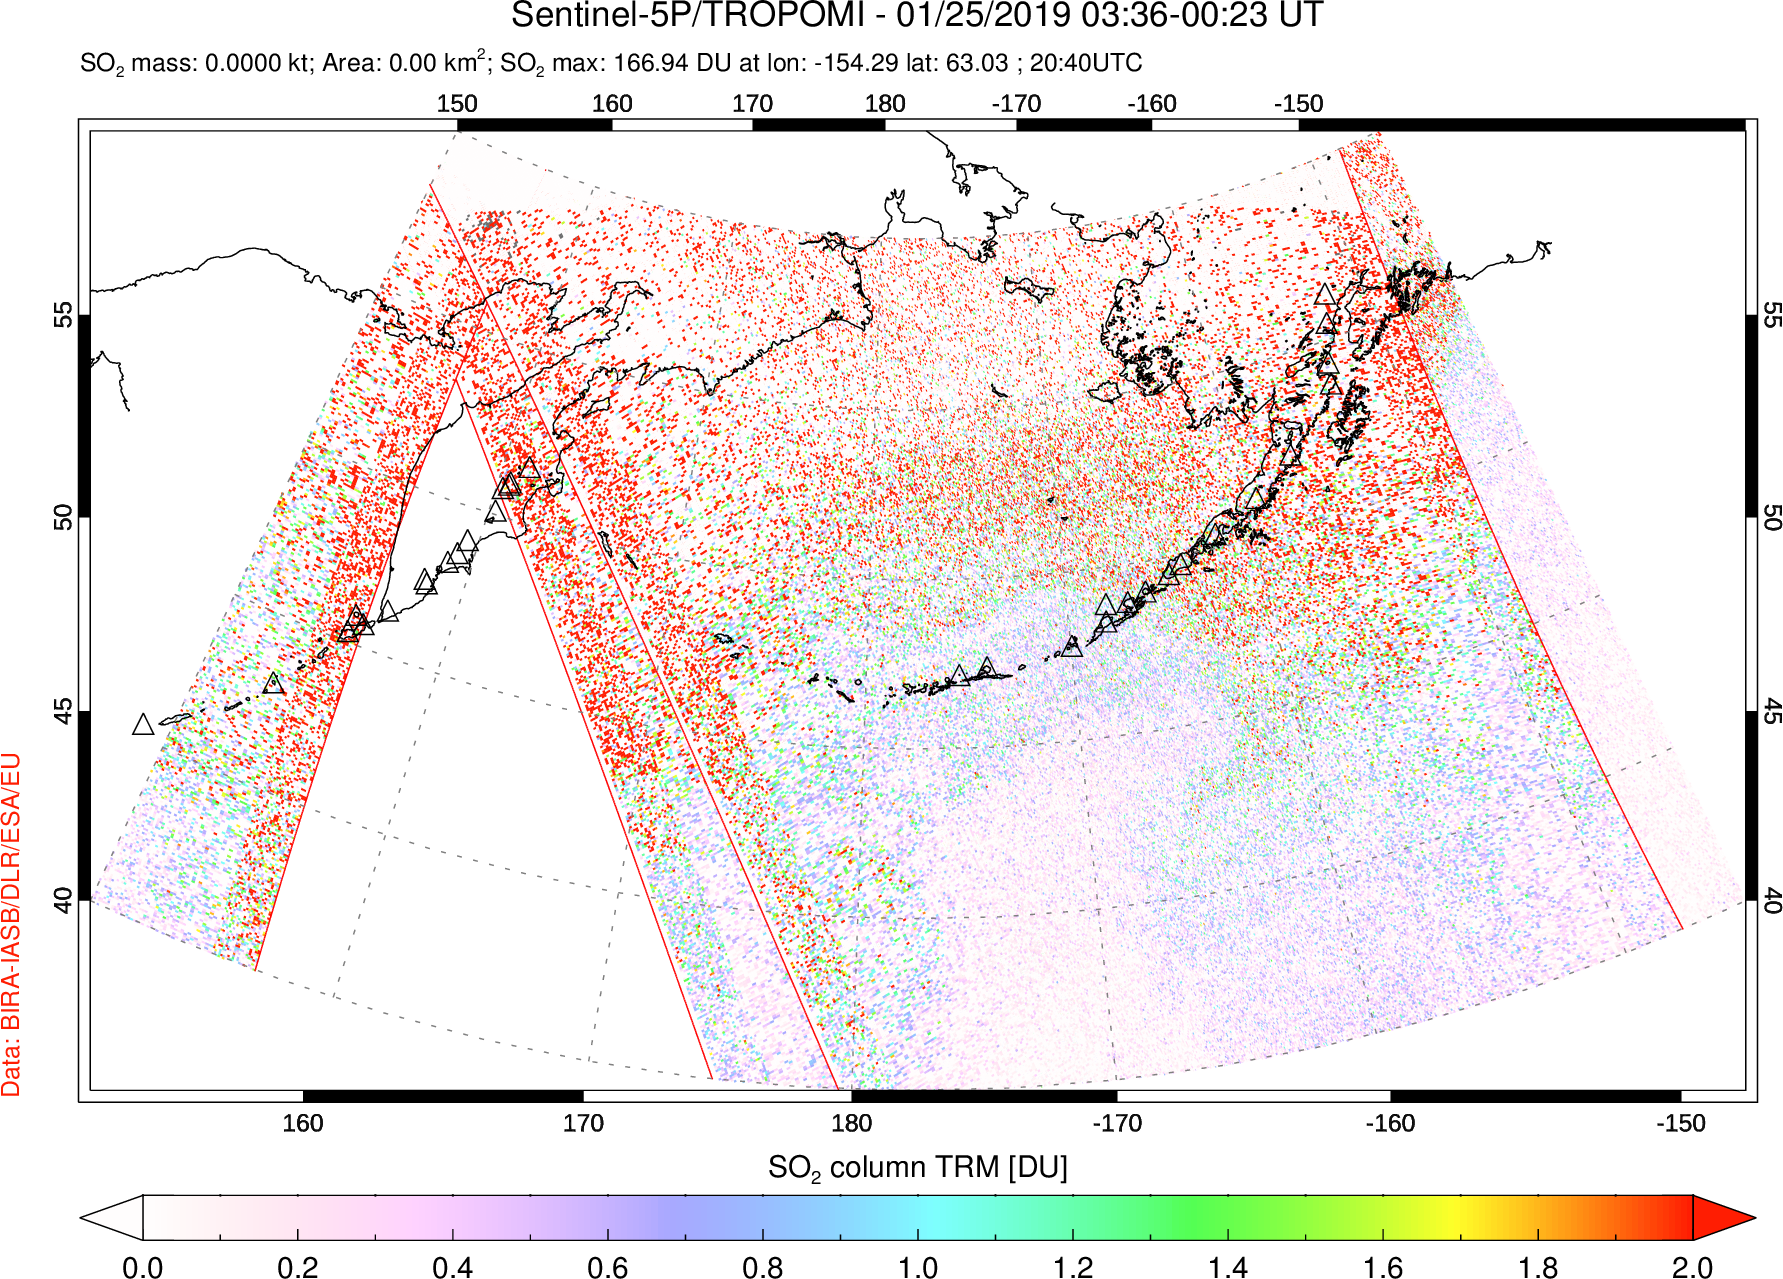 A sulfur dioxide image over North Pacific on Jan 25, 2019.